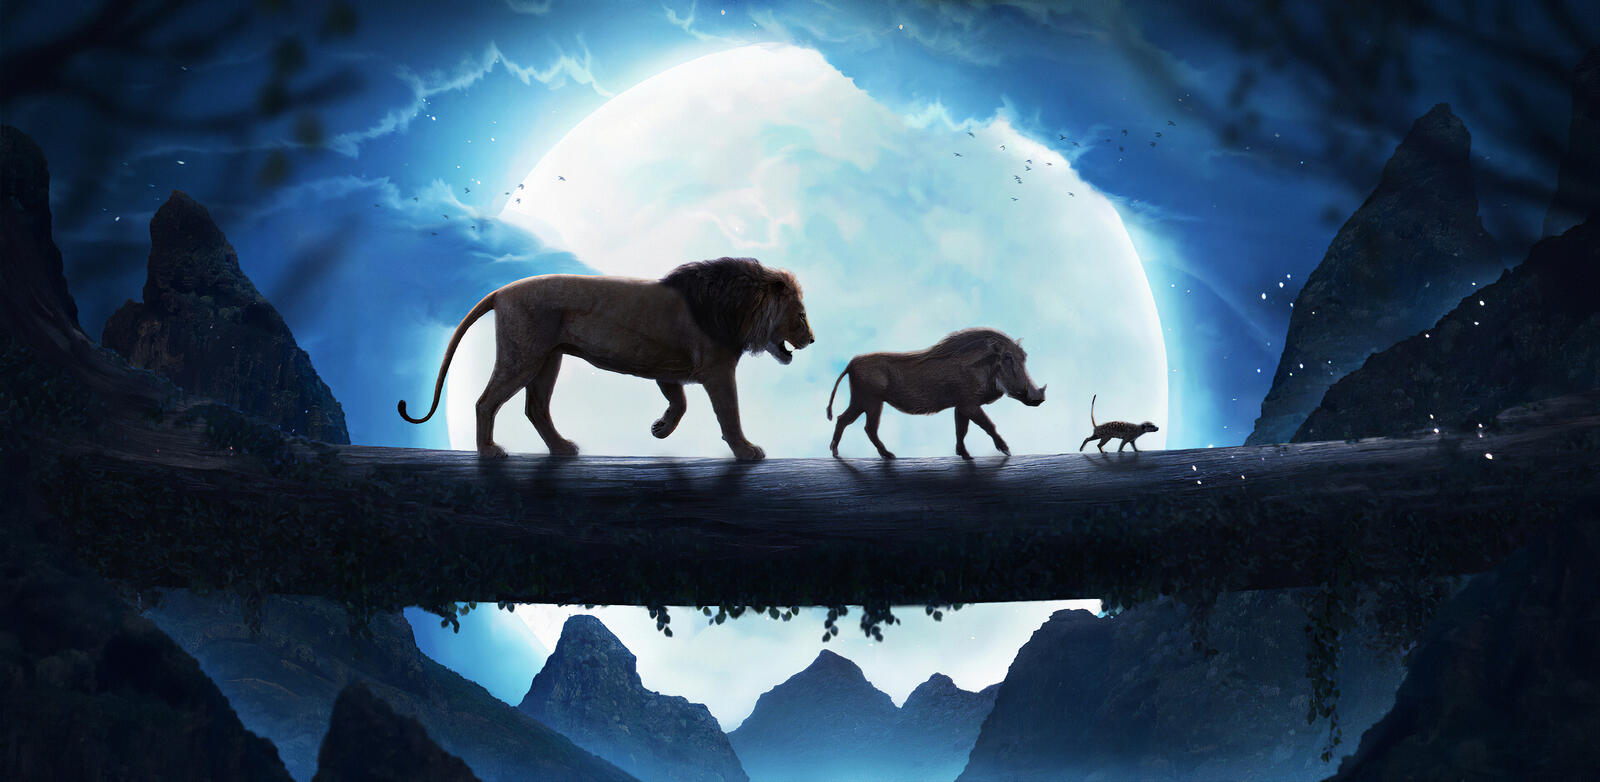 Wallpapers 2019 Movies lion king cartoons on the desktop